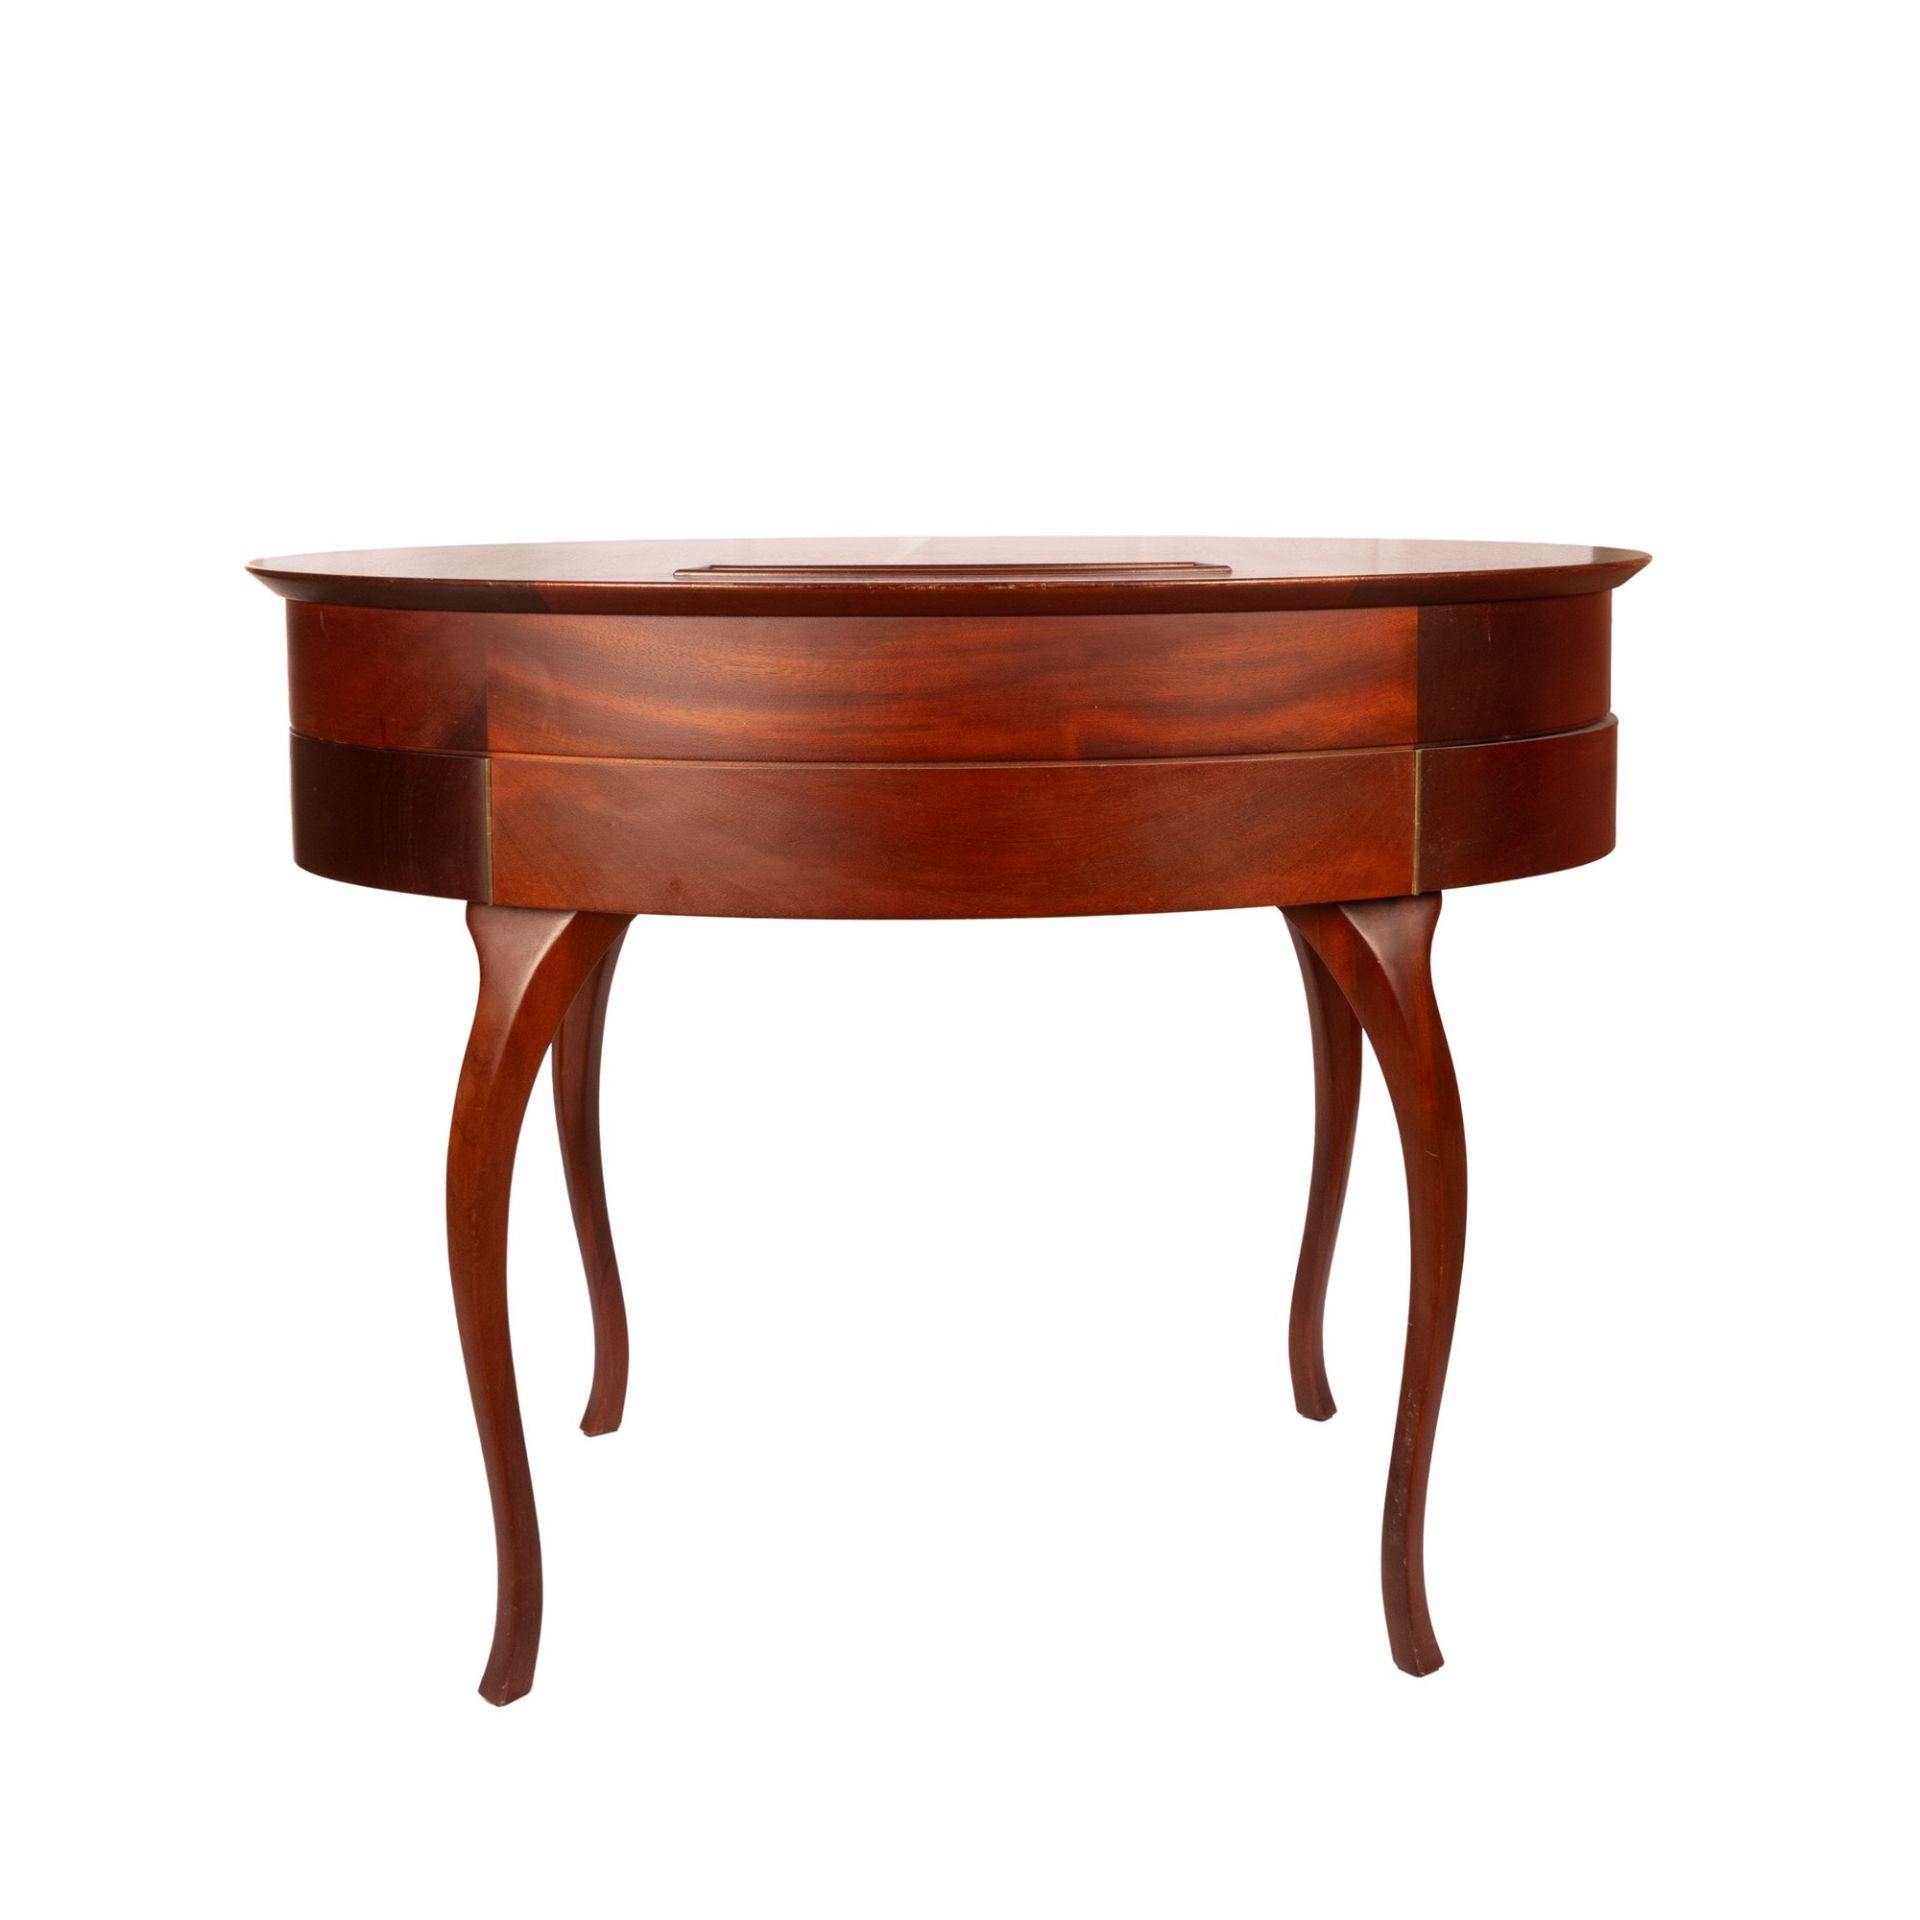 Writing desk in cherry wood - Image 24 of 25